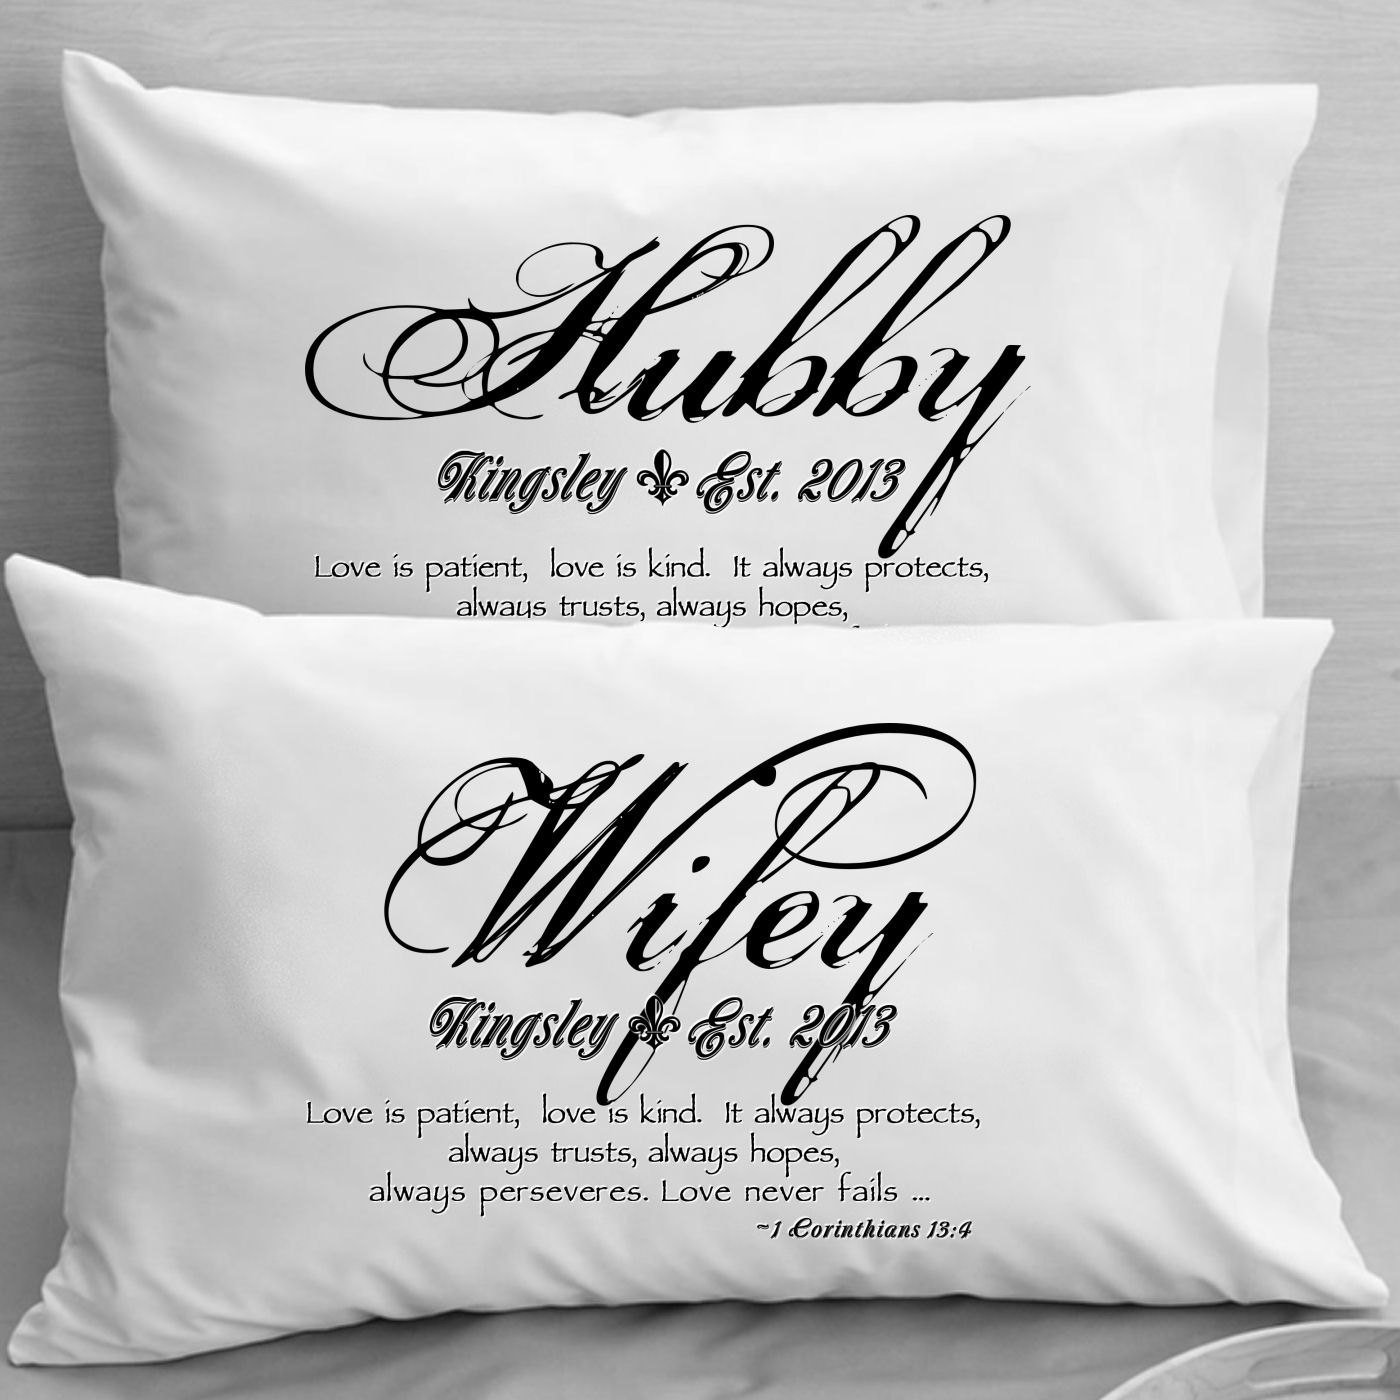 personalized bridal shower gift, bridal shower gift ideas, gifts for the bride, personalized gifts, personalised gifts